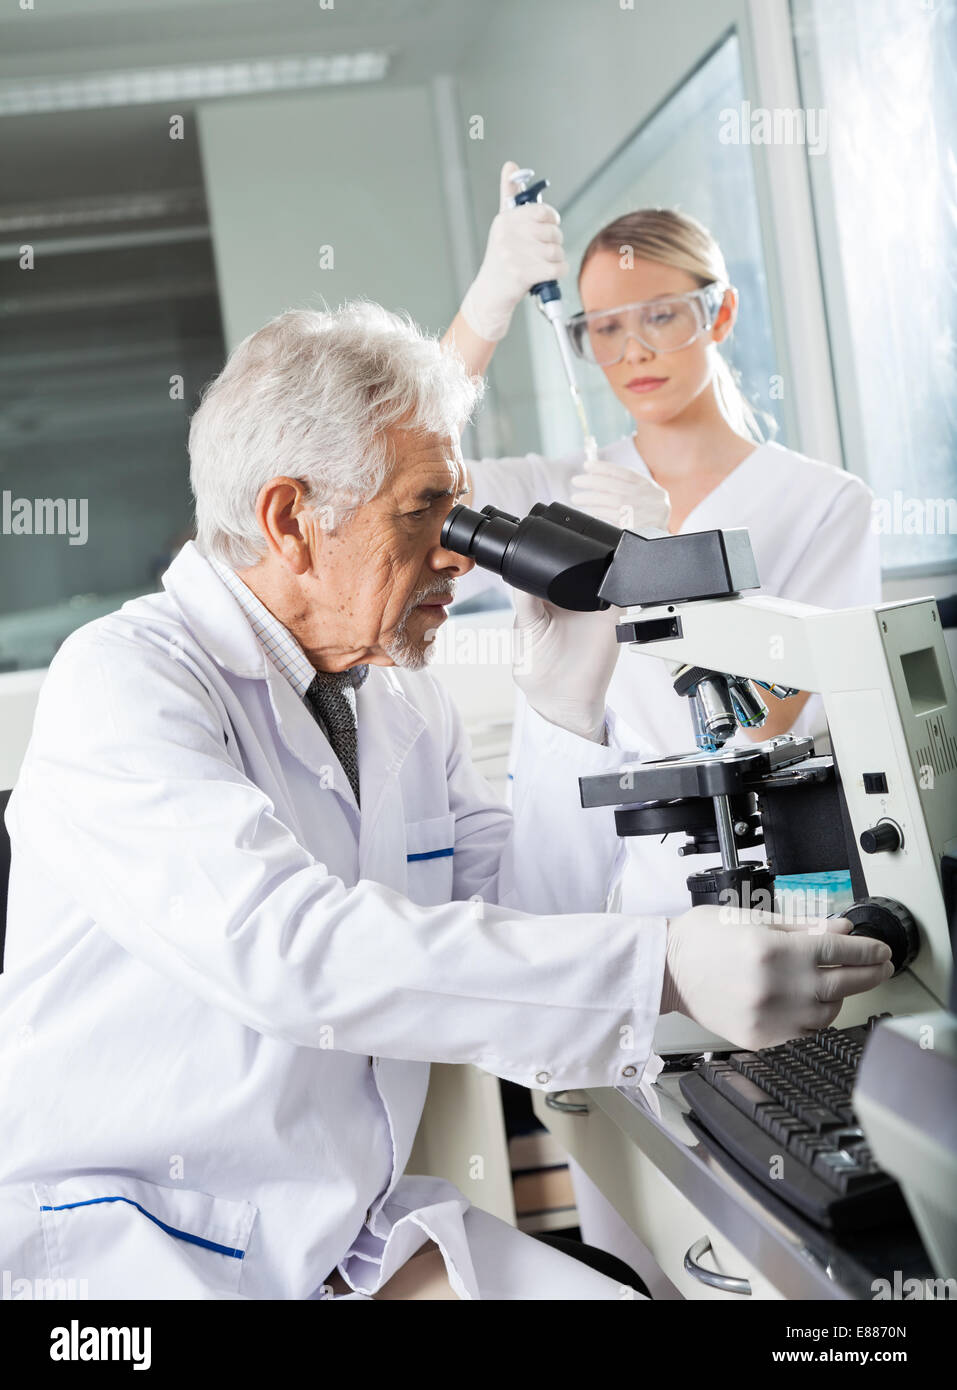 Male scientist using microscope in lab Banque D'Images